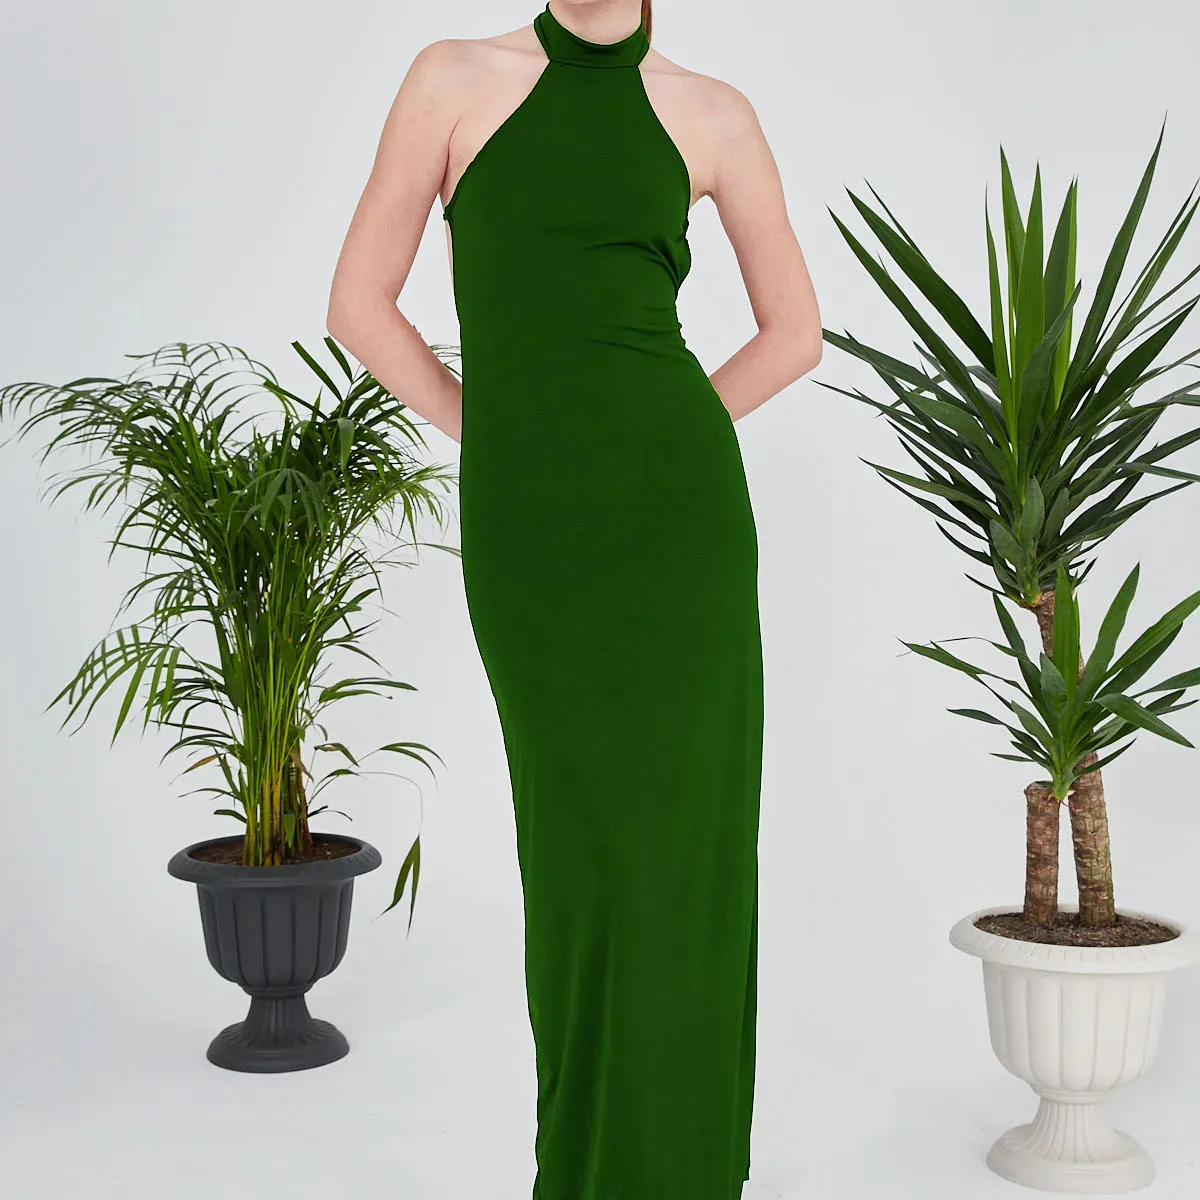 Maxi Length green Camisole Dress Well-Fitting Stylish Dress Elegant Dress With Back Detail green